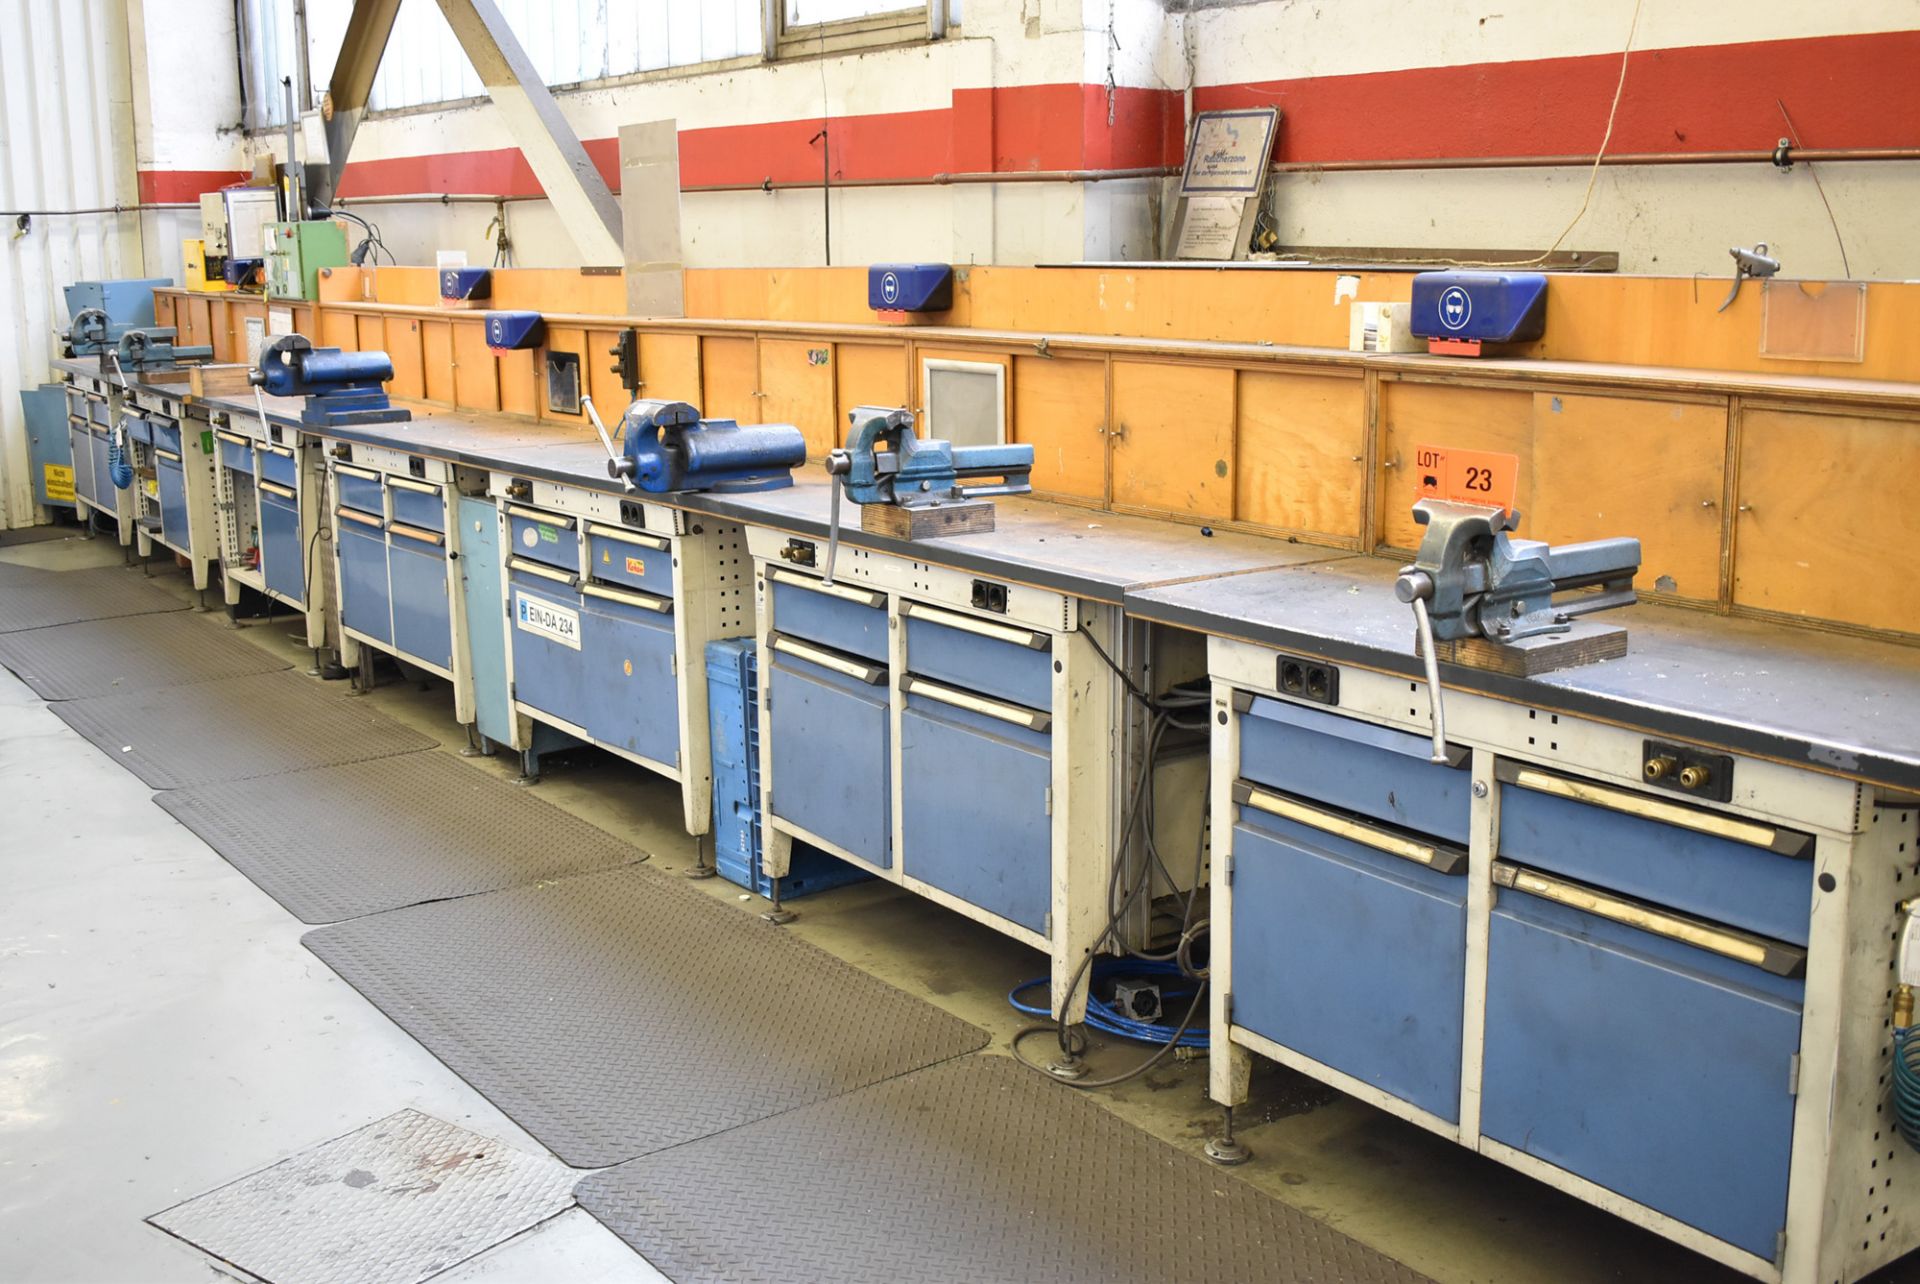 LOT/ (7) KIND WOOD TOP WORK BENCHES WITH (6) 140MM VISES, POWER AND AIR OUTLETS, ELECTRICAL TEST